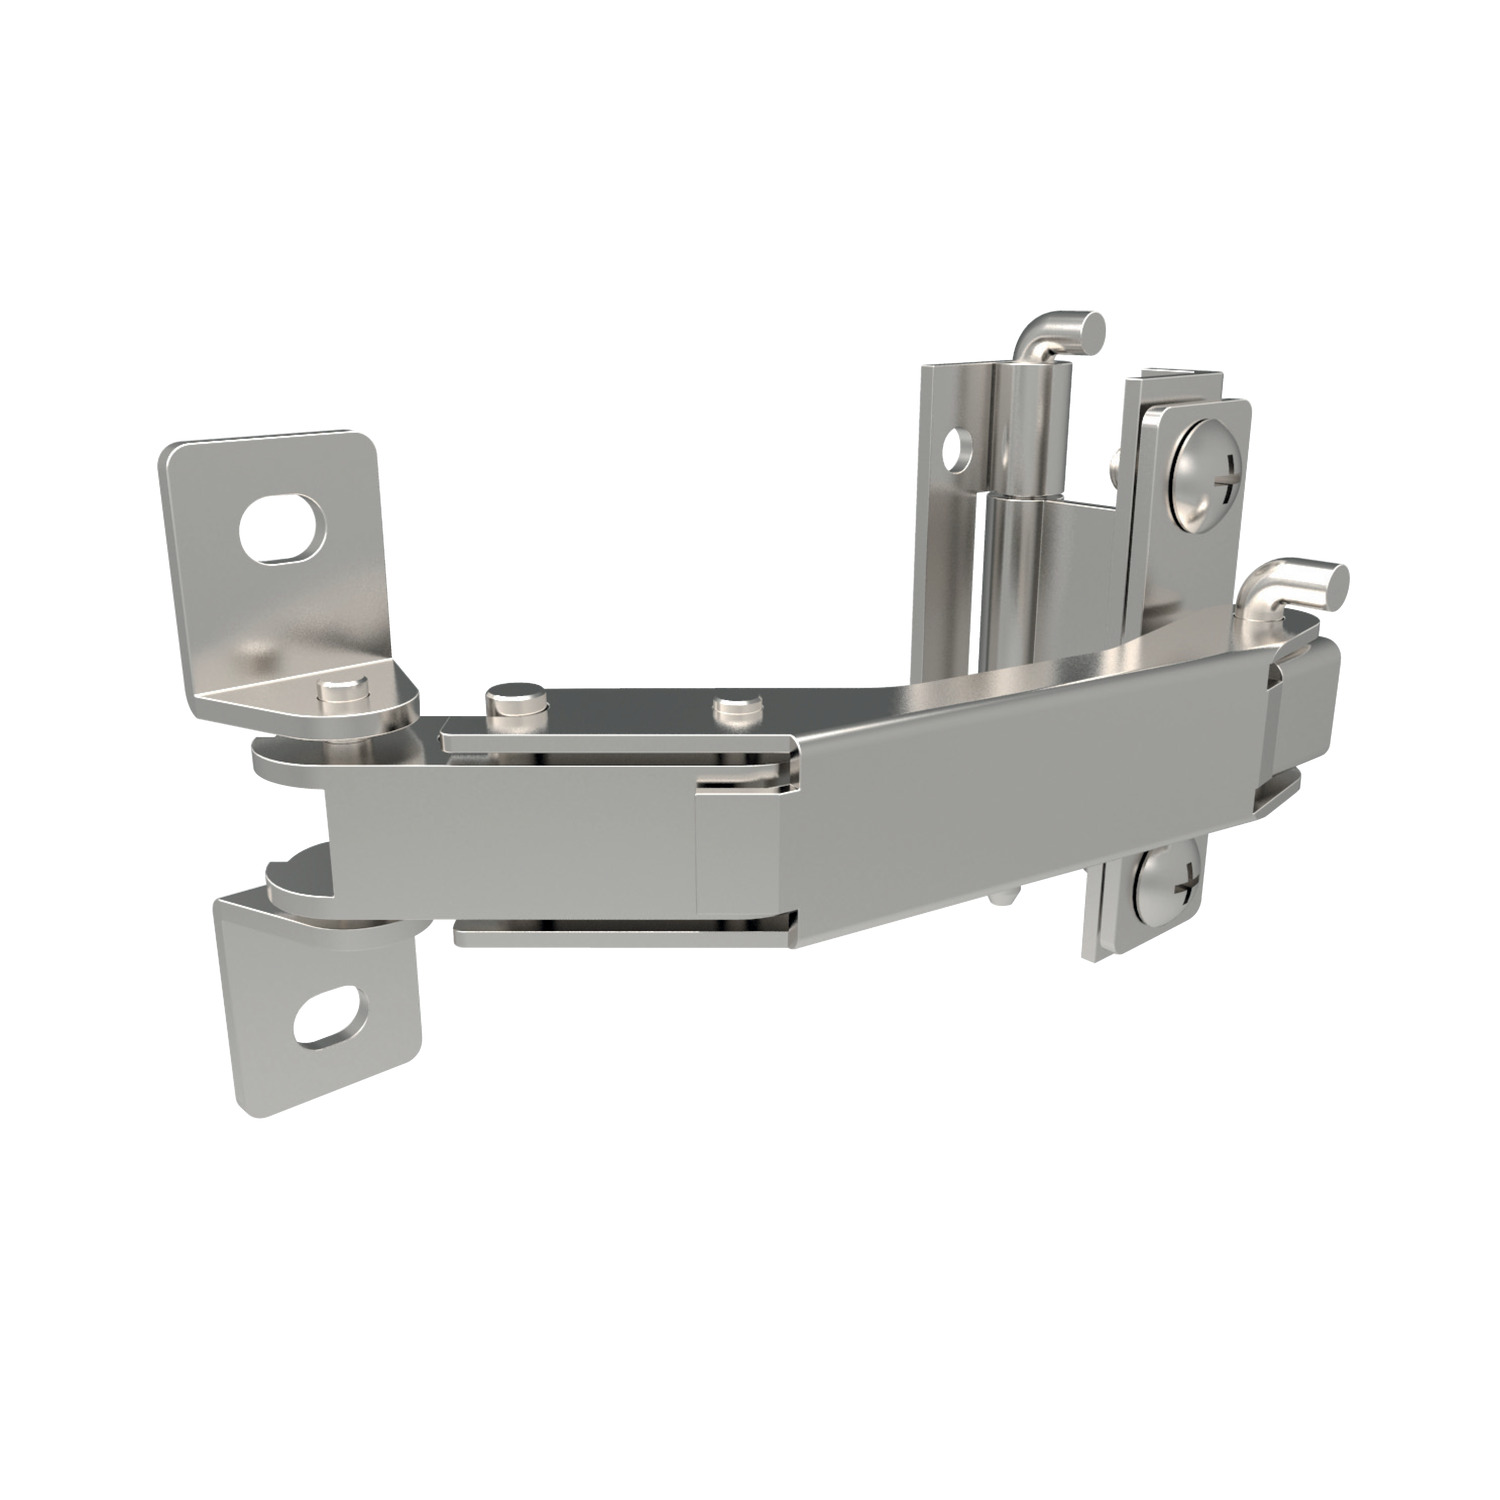 S2250 Ac0010 Concealed Pivot Hinges